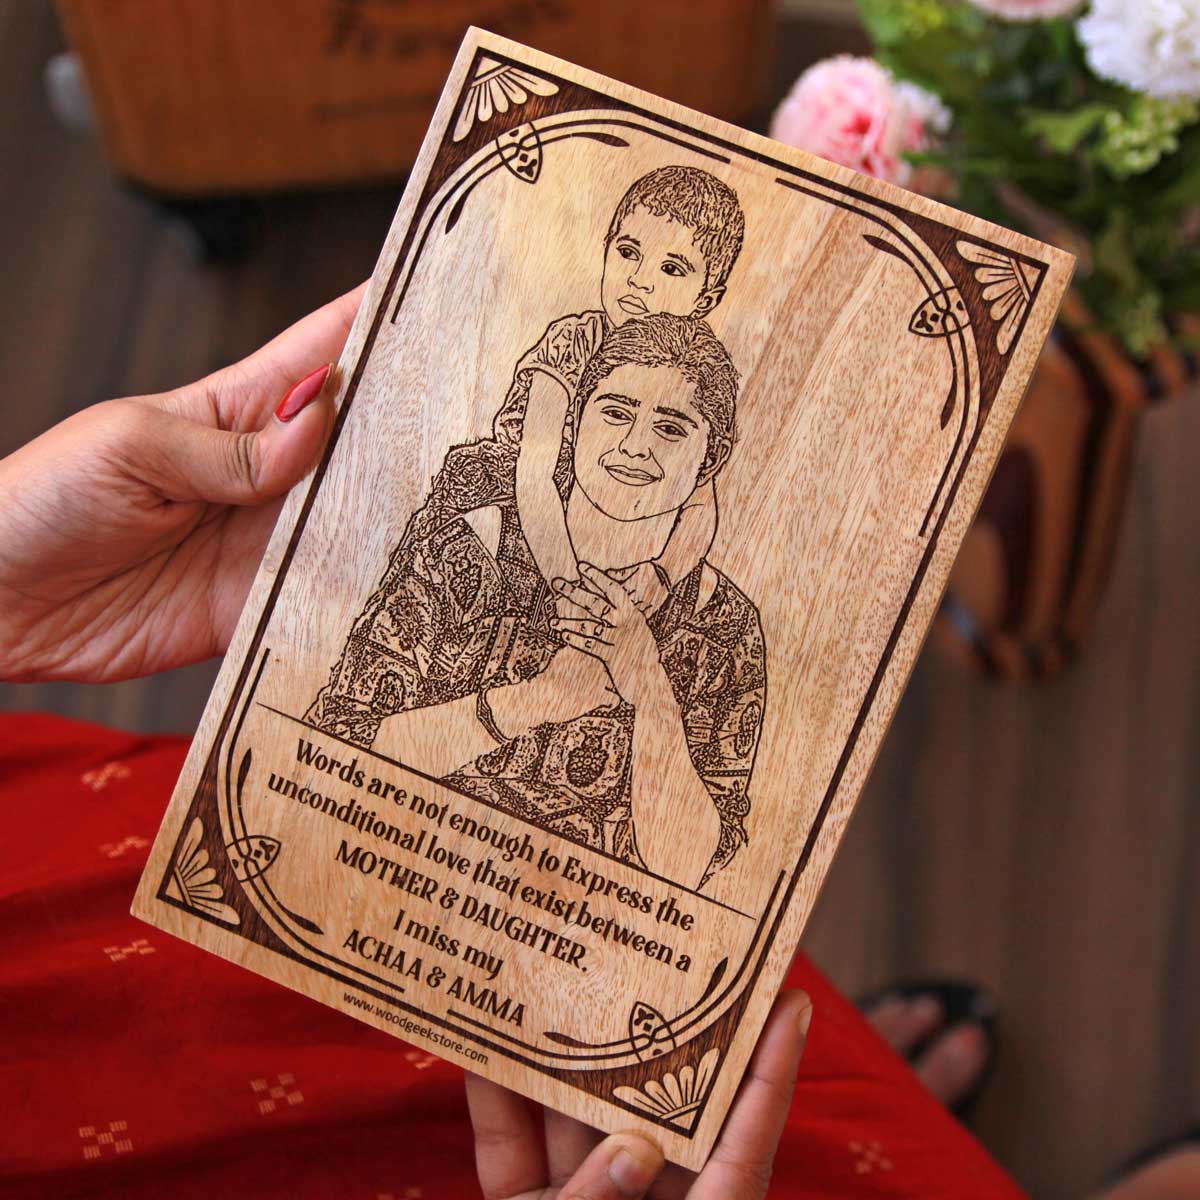 https://cdn.shopify.com/s/files/1/0941/2500/products/engraved-wood-frame-for-mom-gifts-for-mom-woodgeekstore_1600x.jpg?v=1650274079